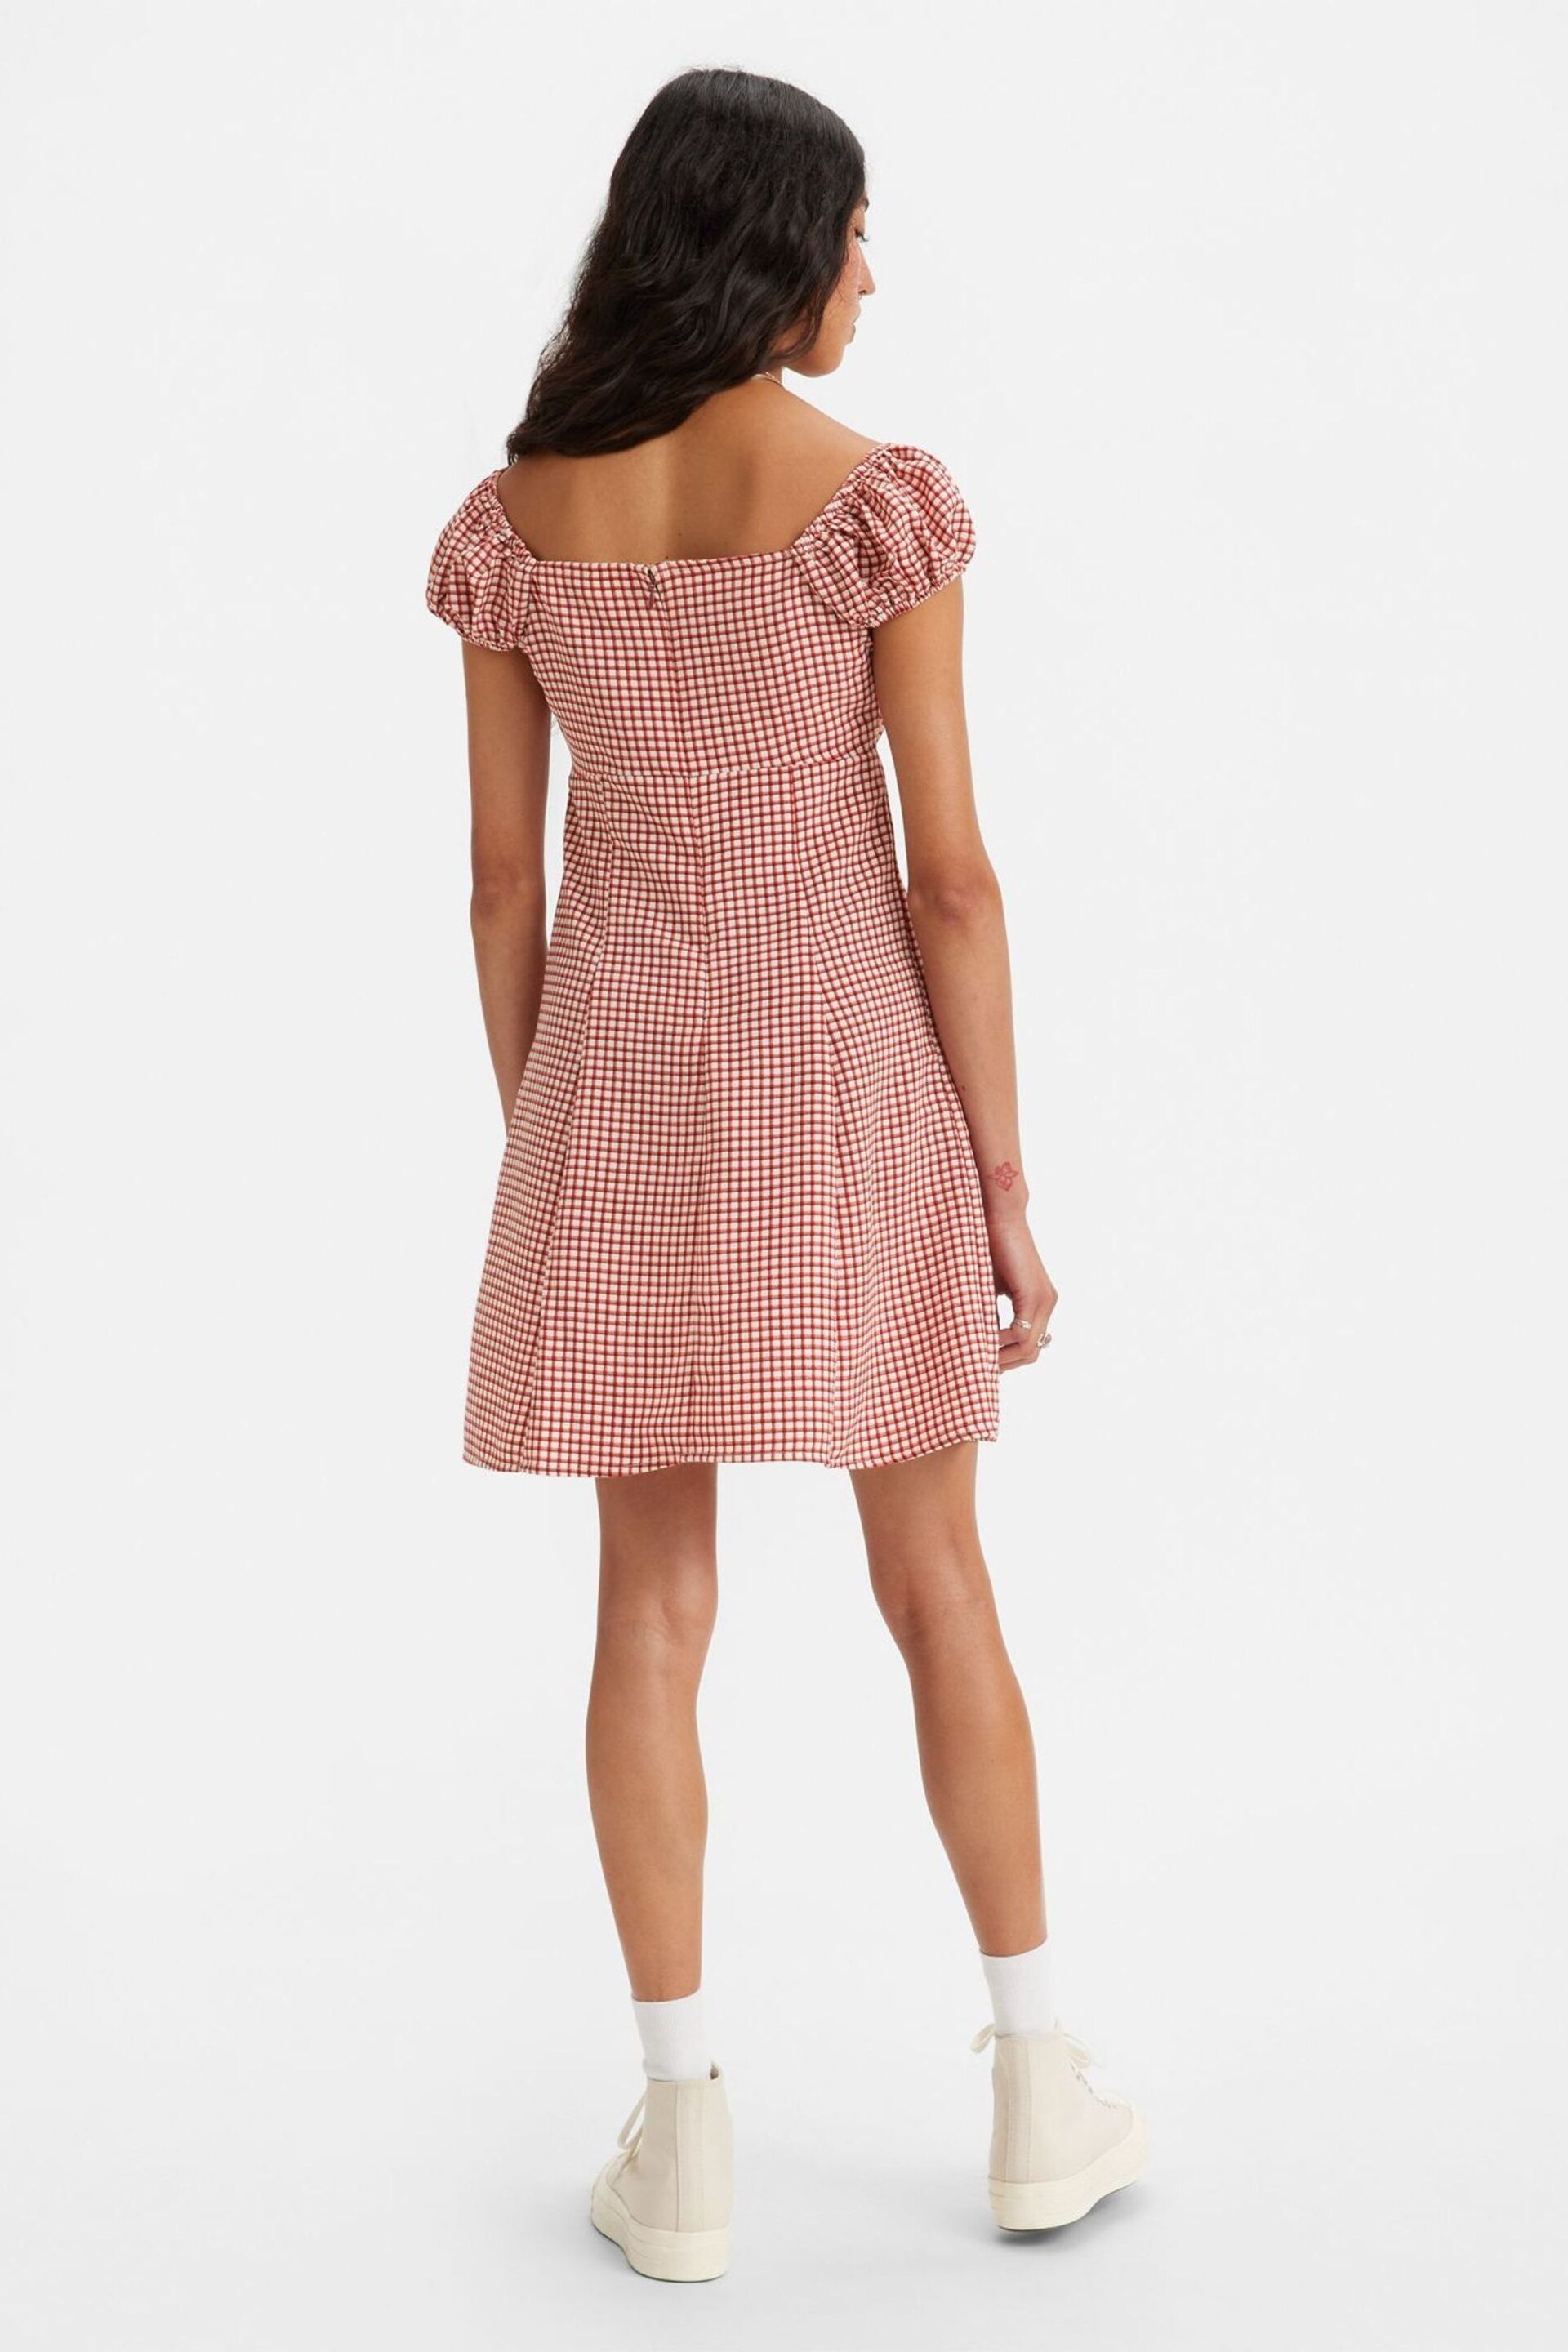 Levi's® Red Check Cap Sleeve Dress - Image 2 of 4